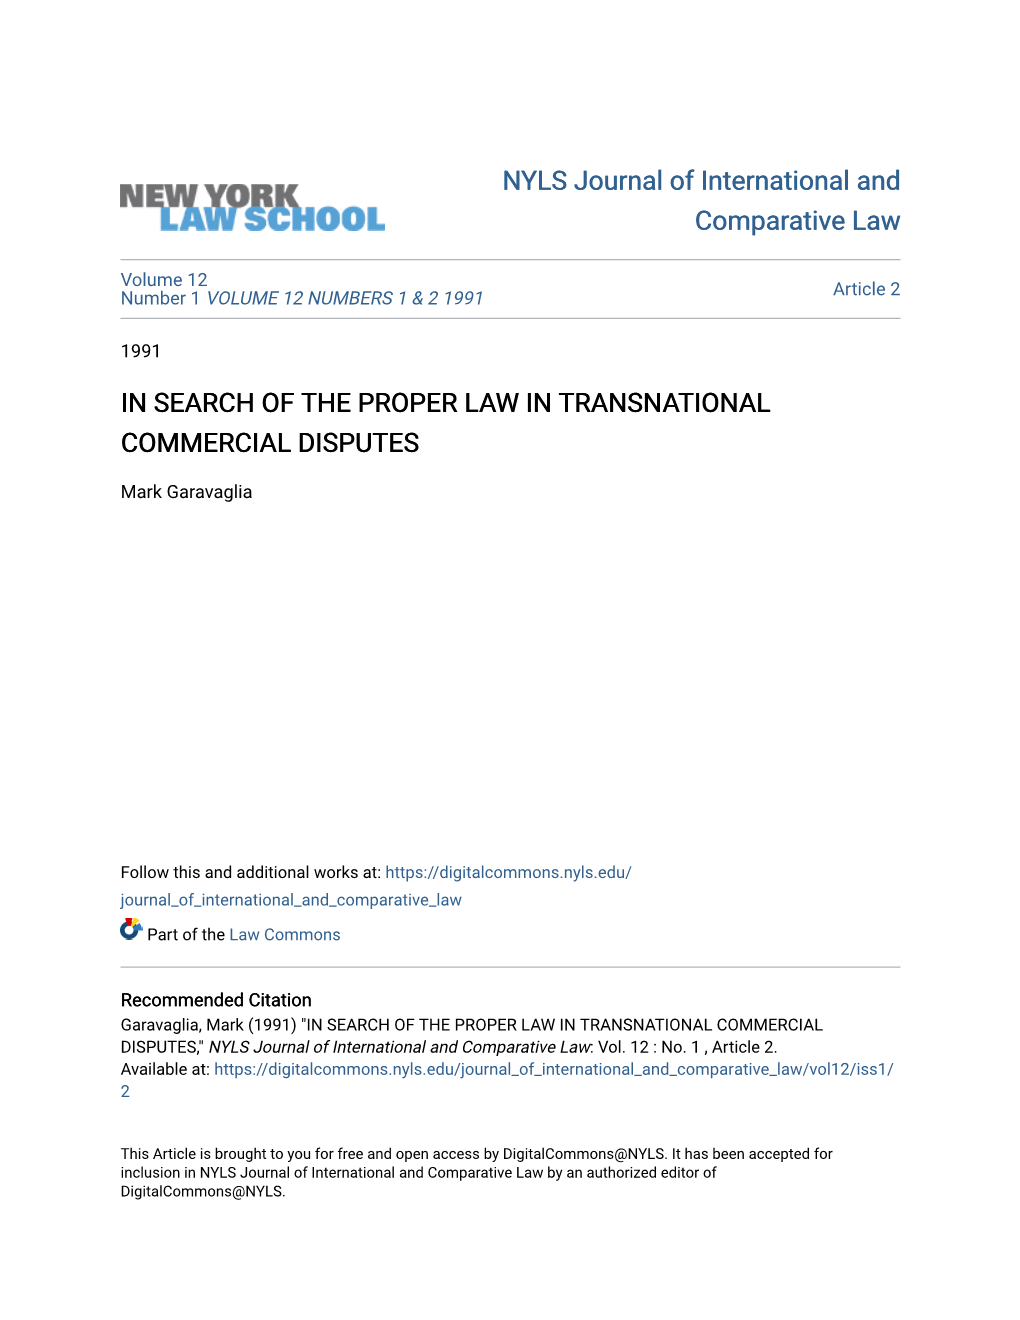 In Search of the Proper Law in Transnational Commercial Disputes